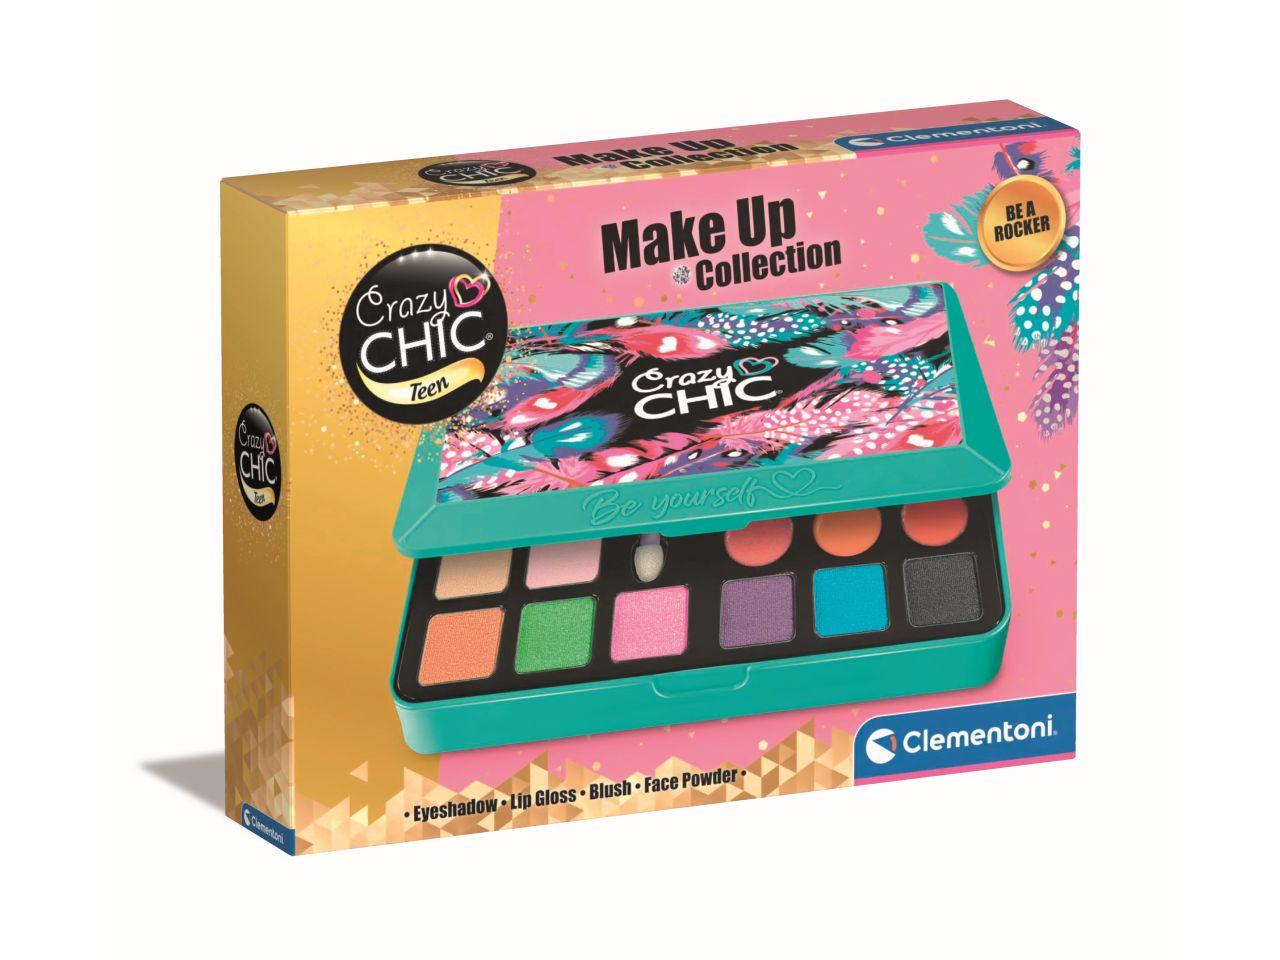 Clementoni crazy chic be yourself collection - be a rocker